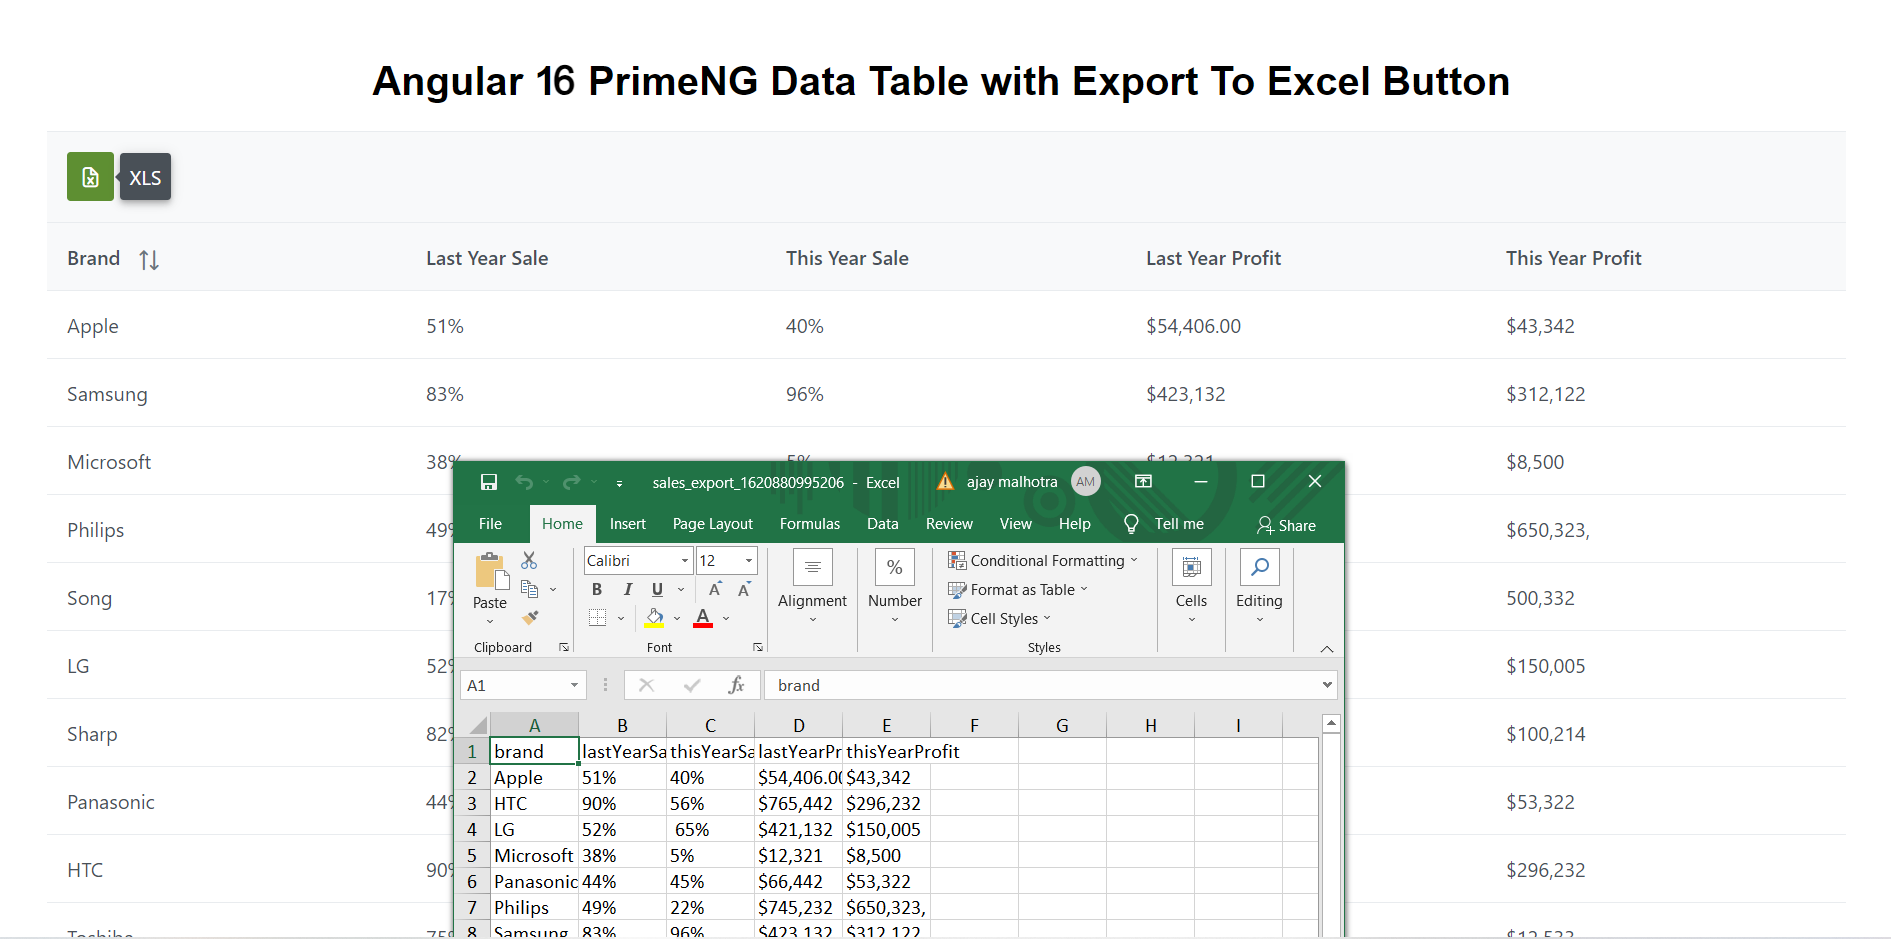 Angular 16 PrimeNG Data Table with Export to Excel Button Working